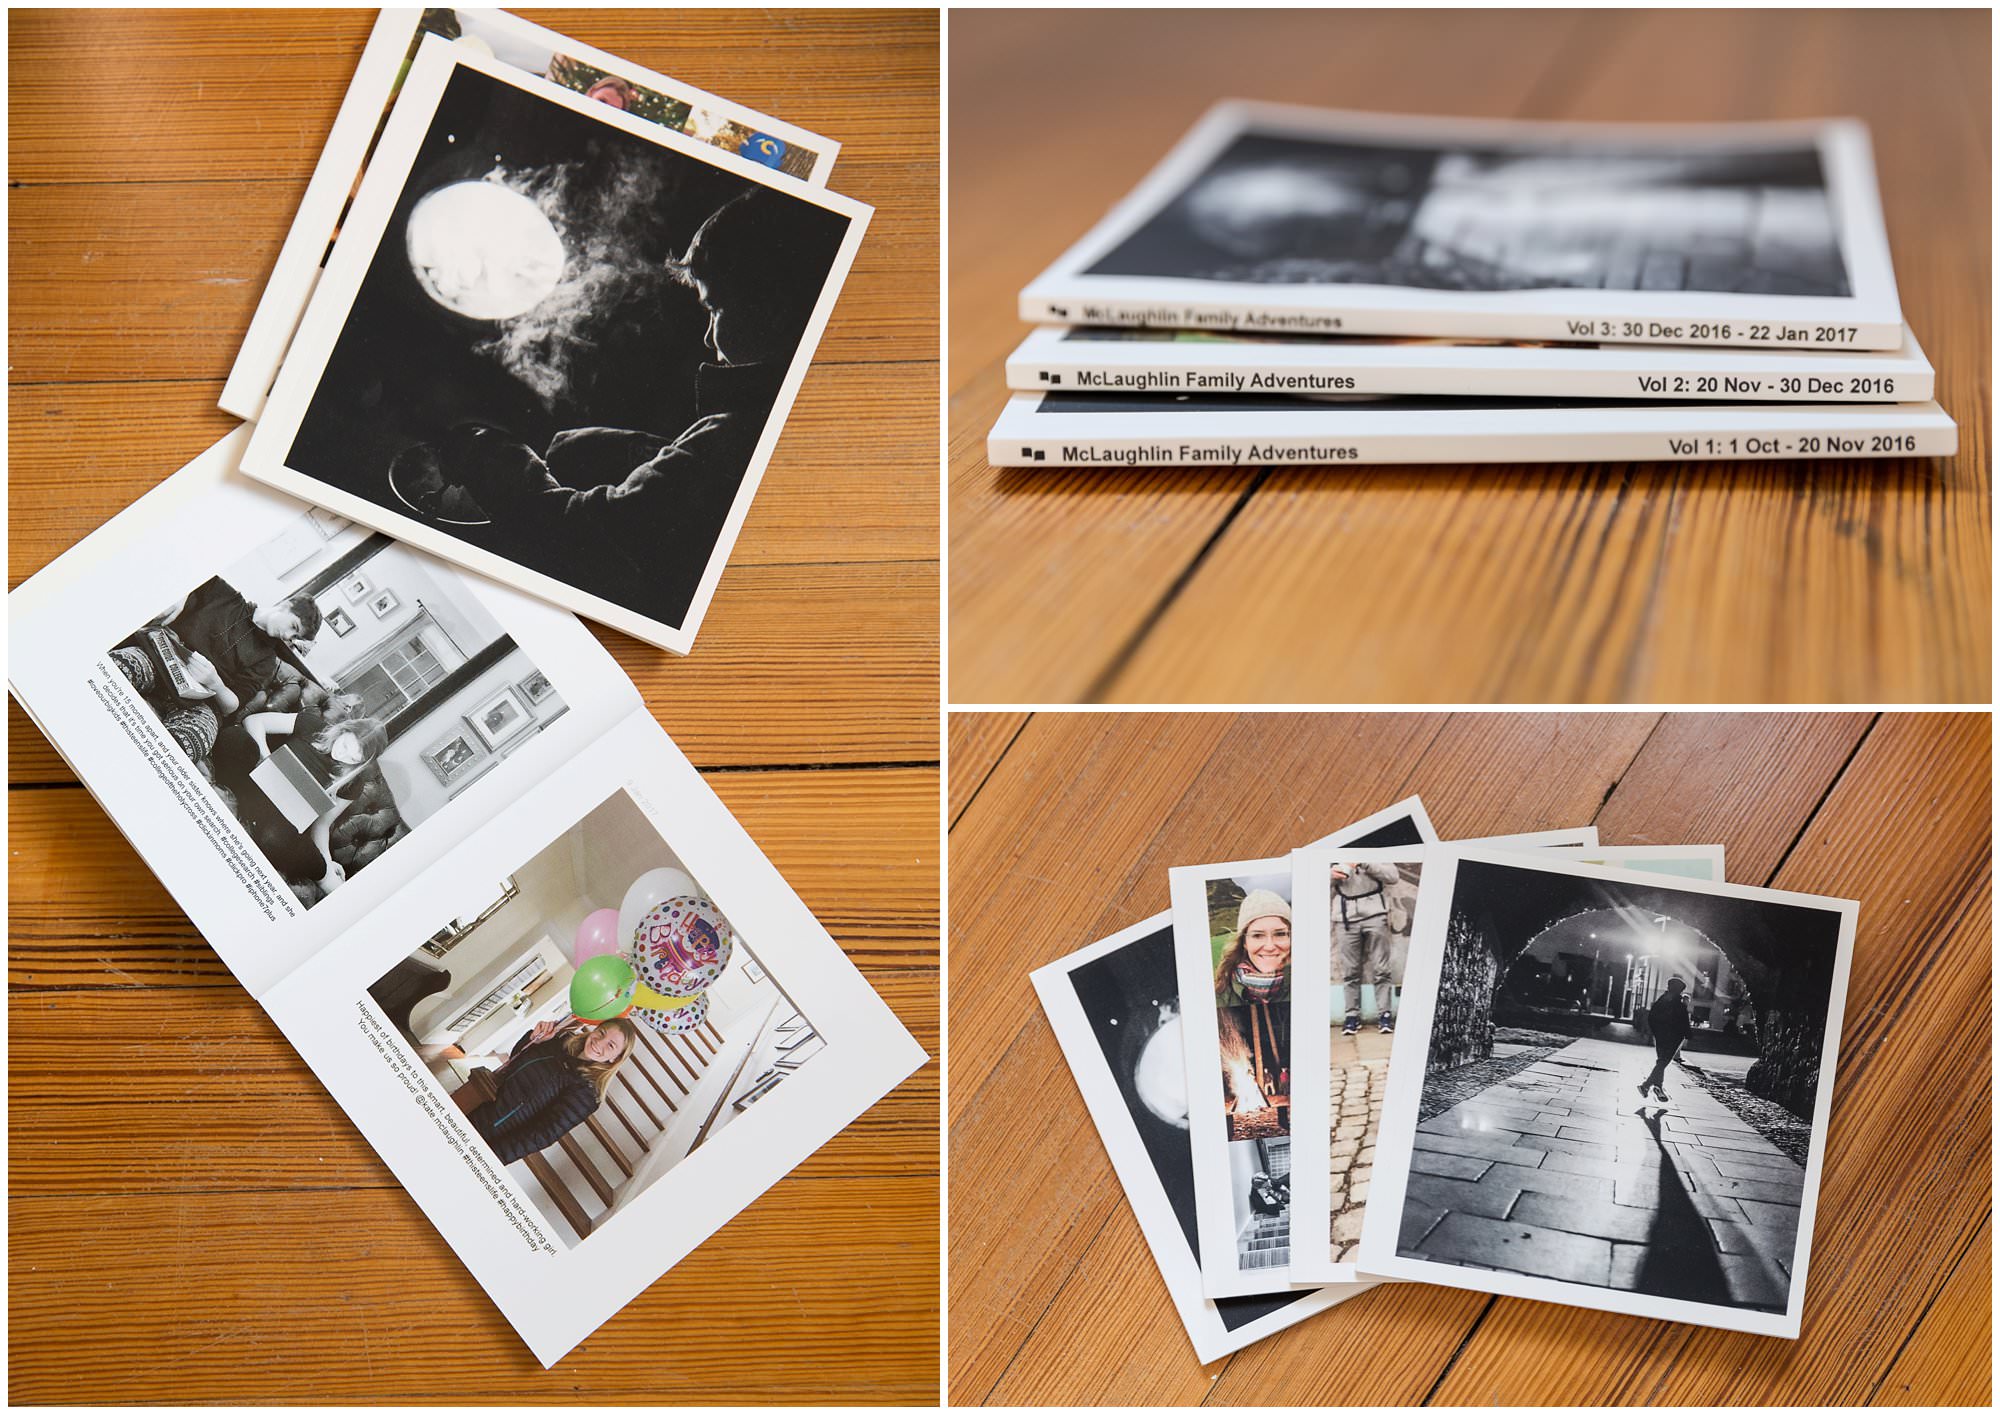 How to Print Your Instagram Photos